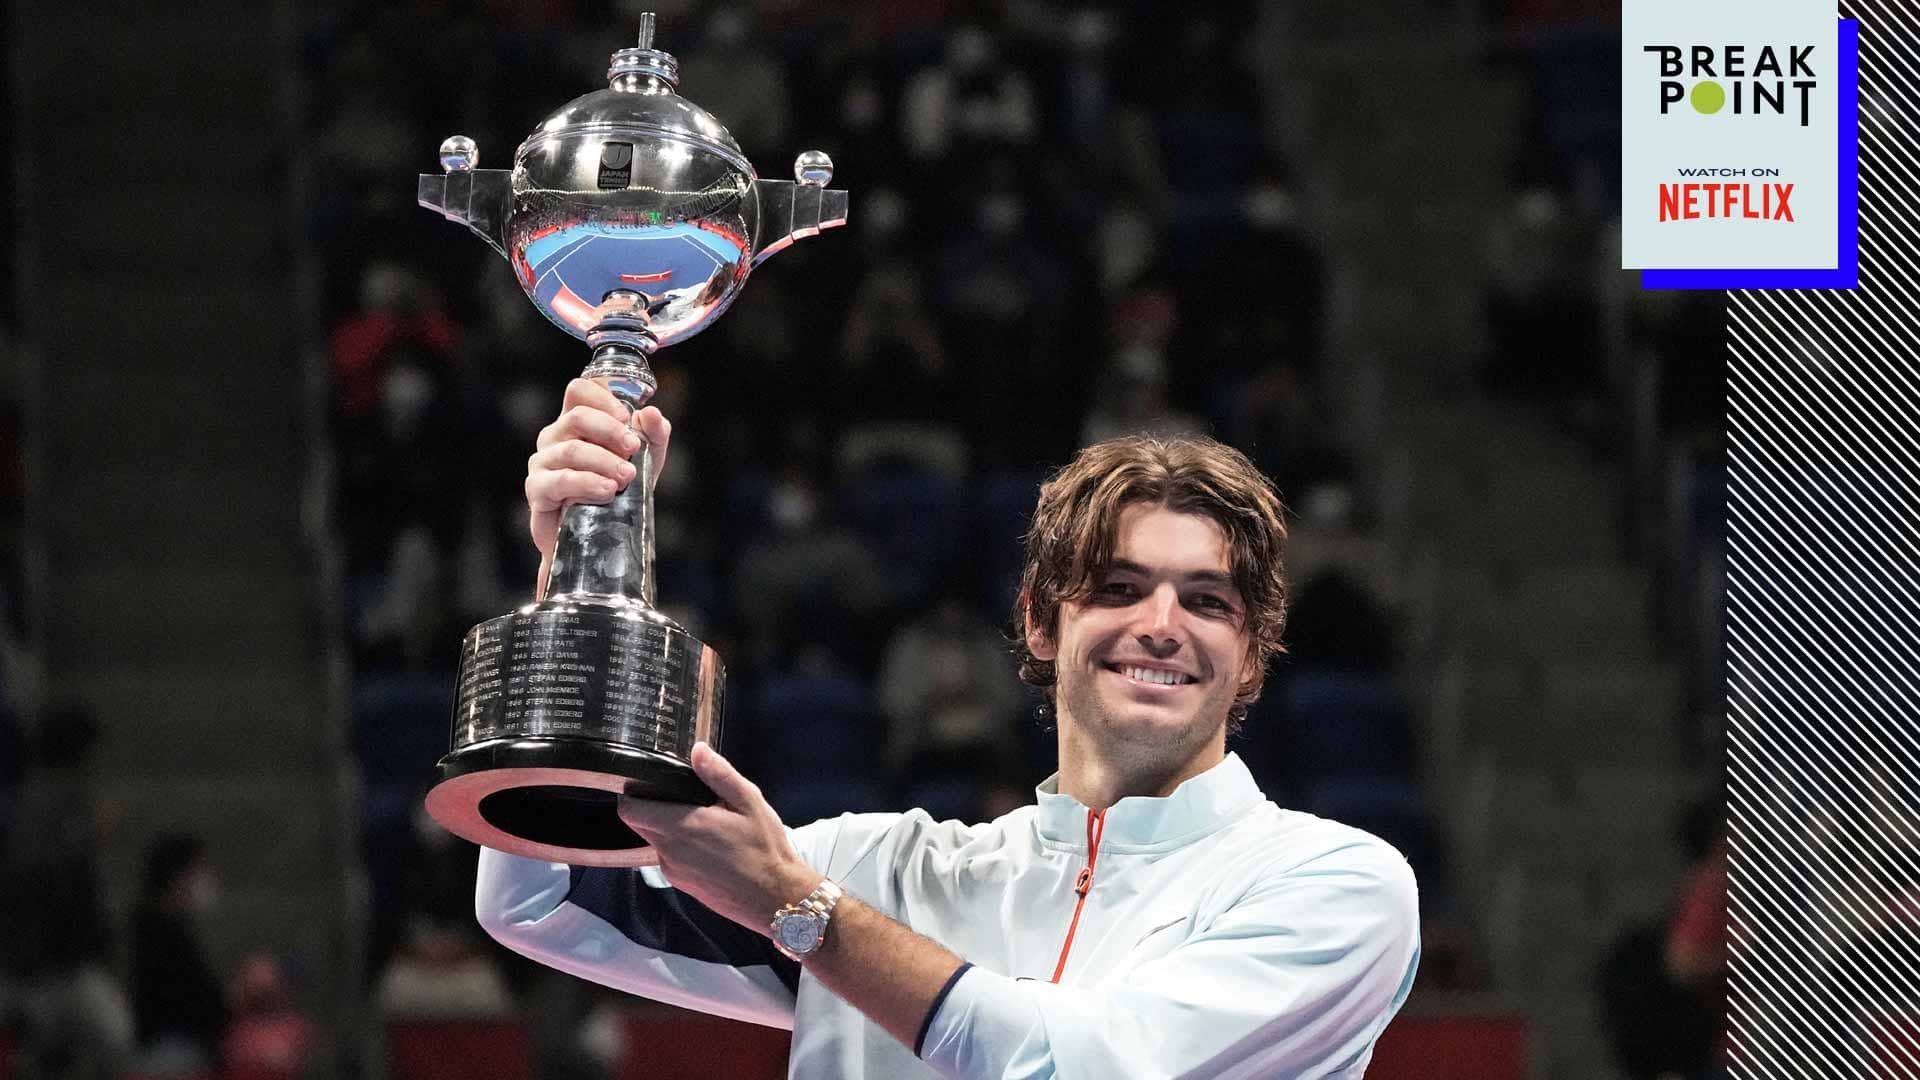 Taylor Fritz triumphs at the ATP 500 event in Tokyo.